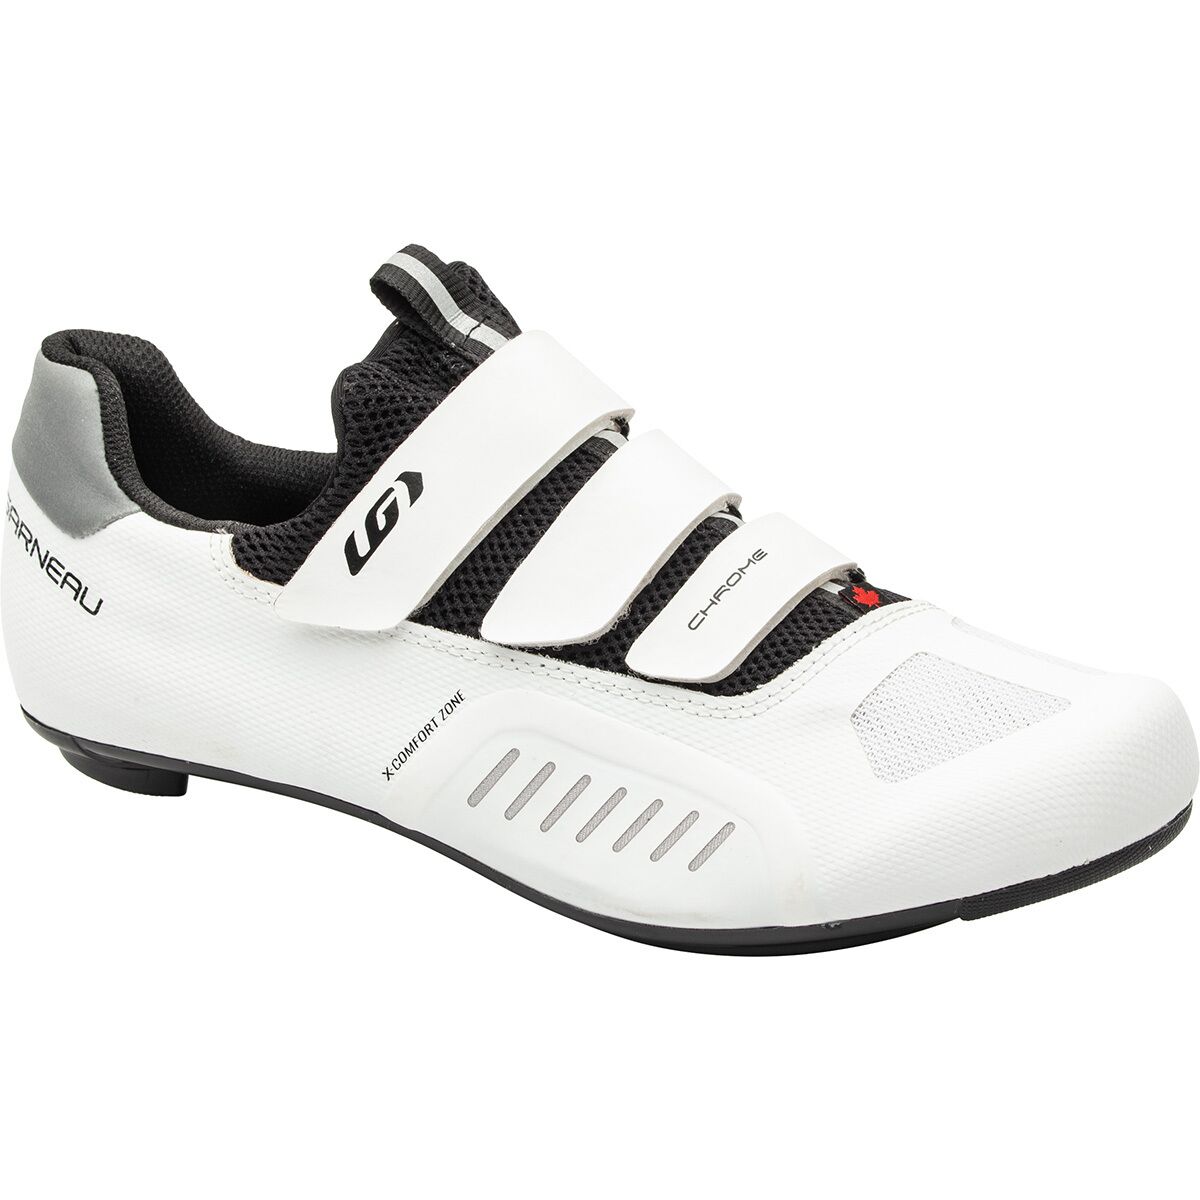 Louis Garneau Chrome II 2 - Cycling Bike Shoes - 2 sizes available - bicycle  parts - by owner - bike sale - craigslist